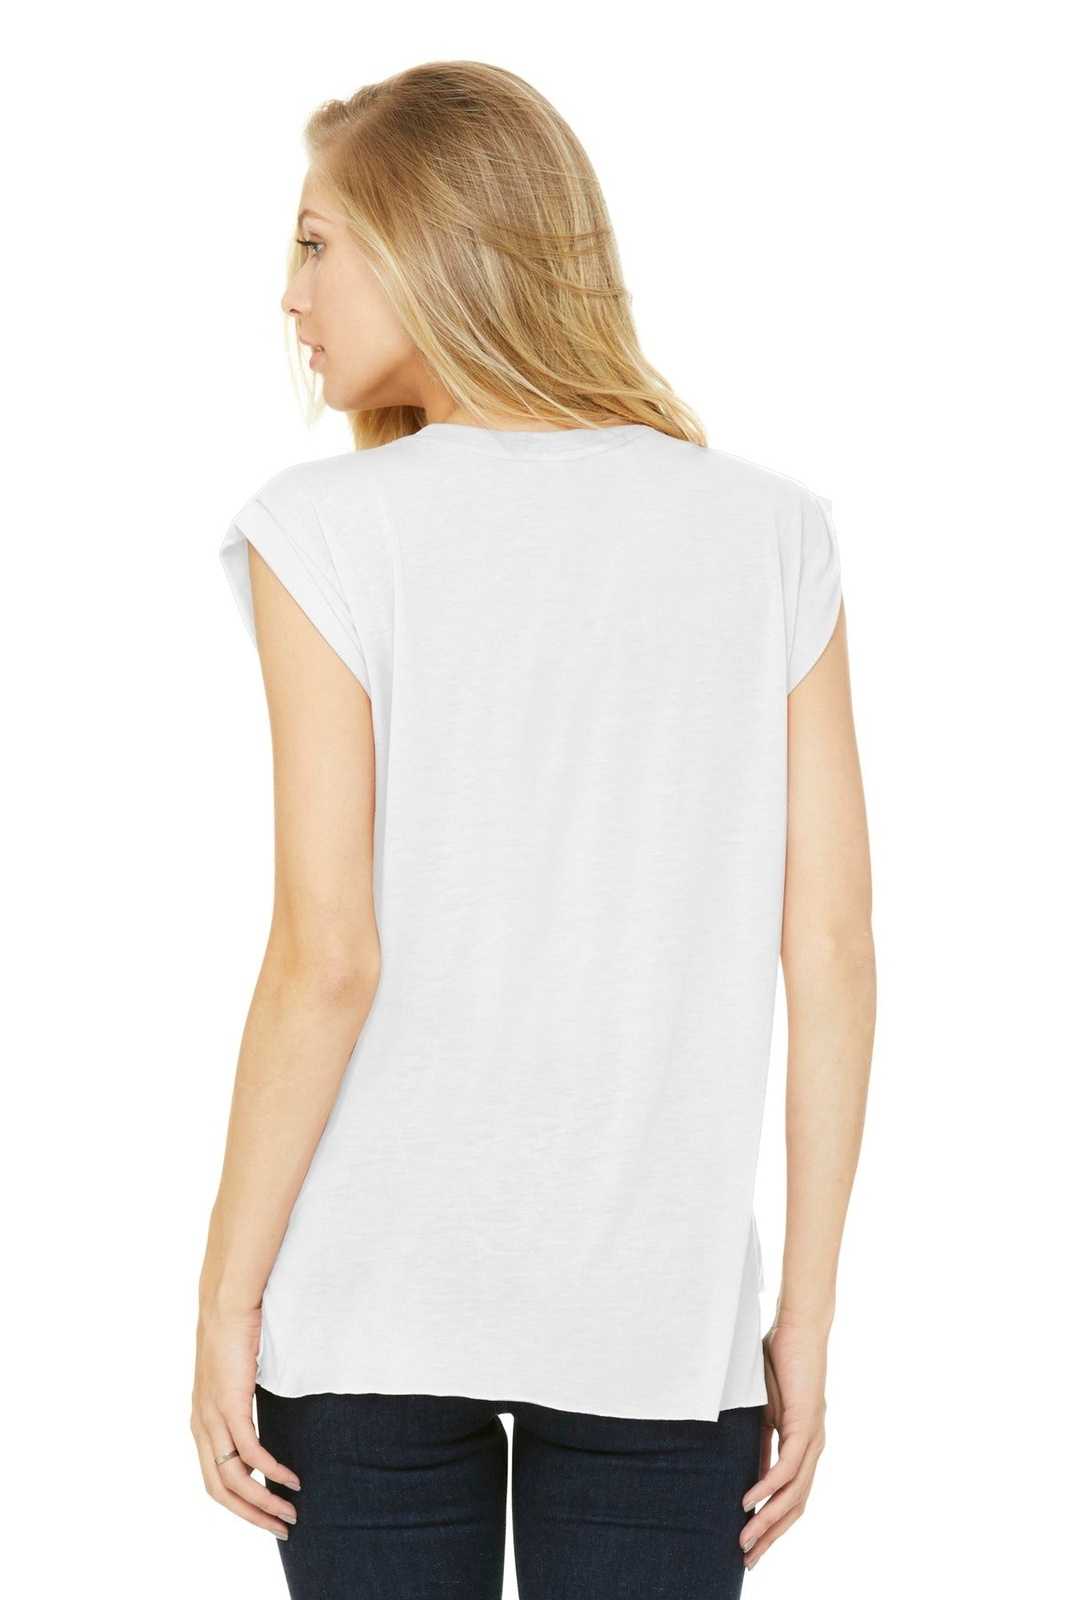 Bella + Canvas 8804 Women's Flowy Muscle Tee with Rolled Cuffs - White - HIT a Double